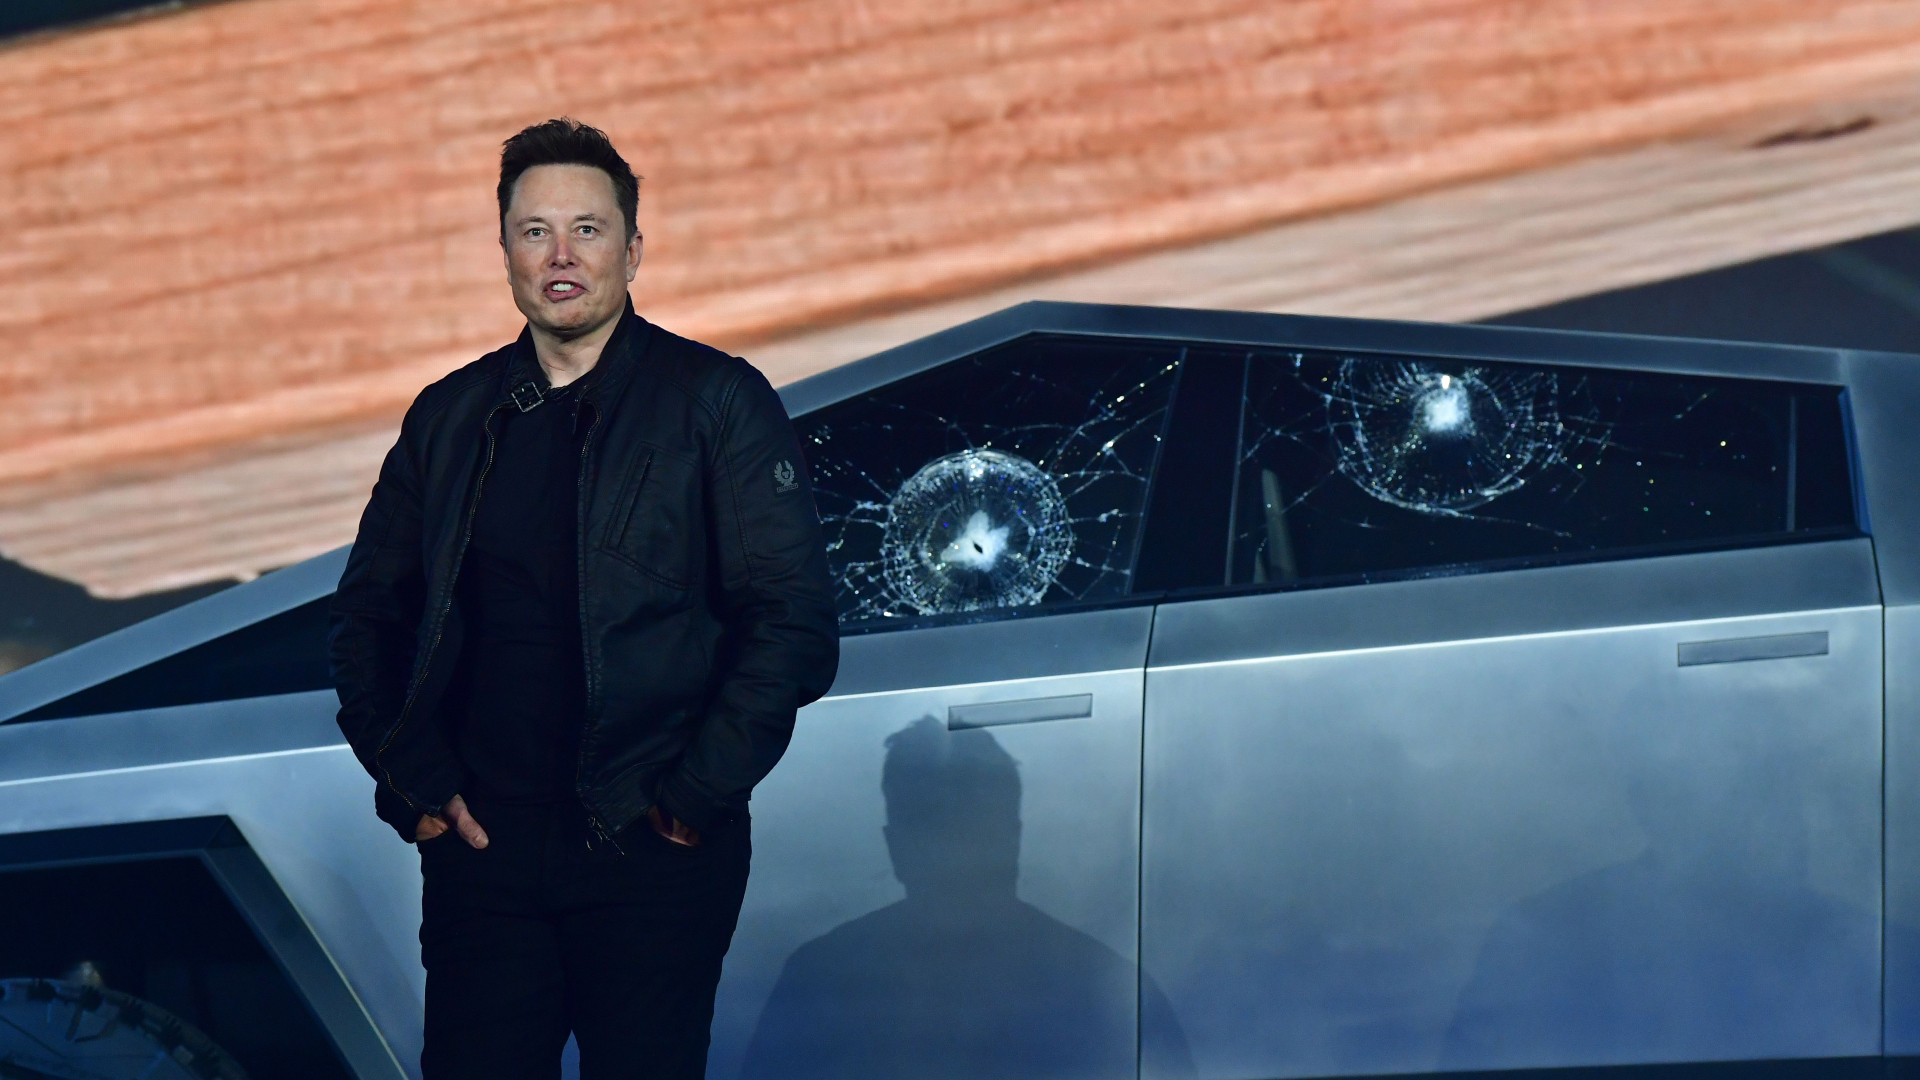 Elon Musk Explains Why the Tesla Cybertruck's Armored